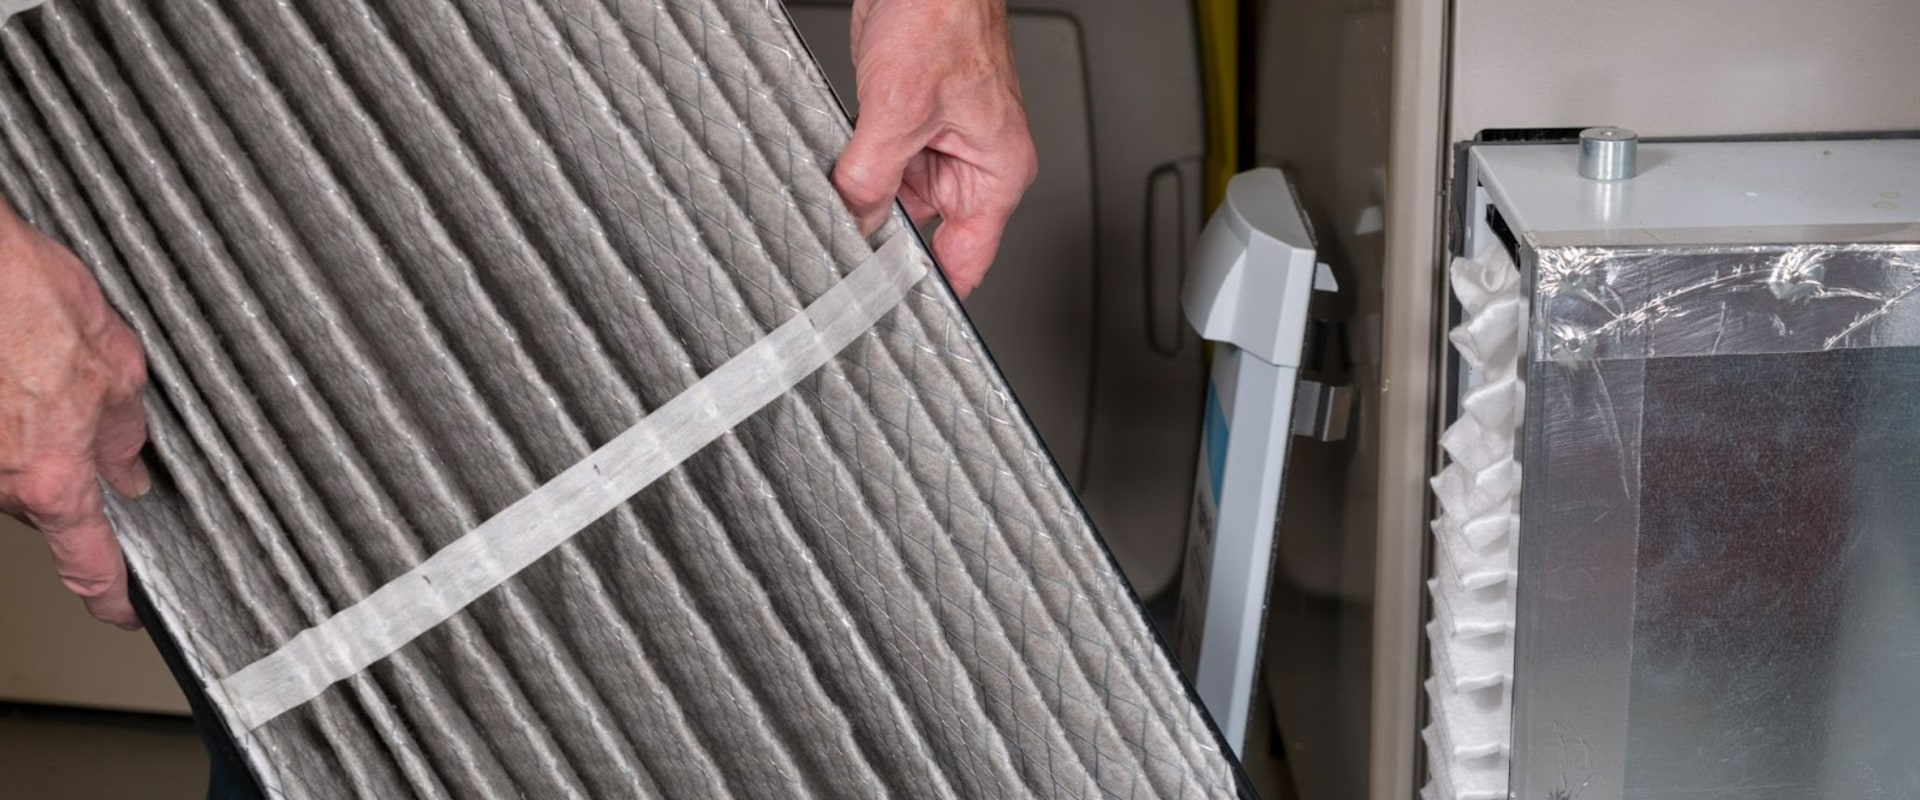 The Hidden Dangers of Neglecting Your Air Filter